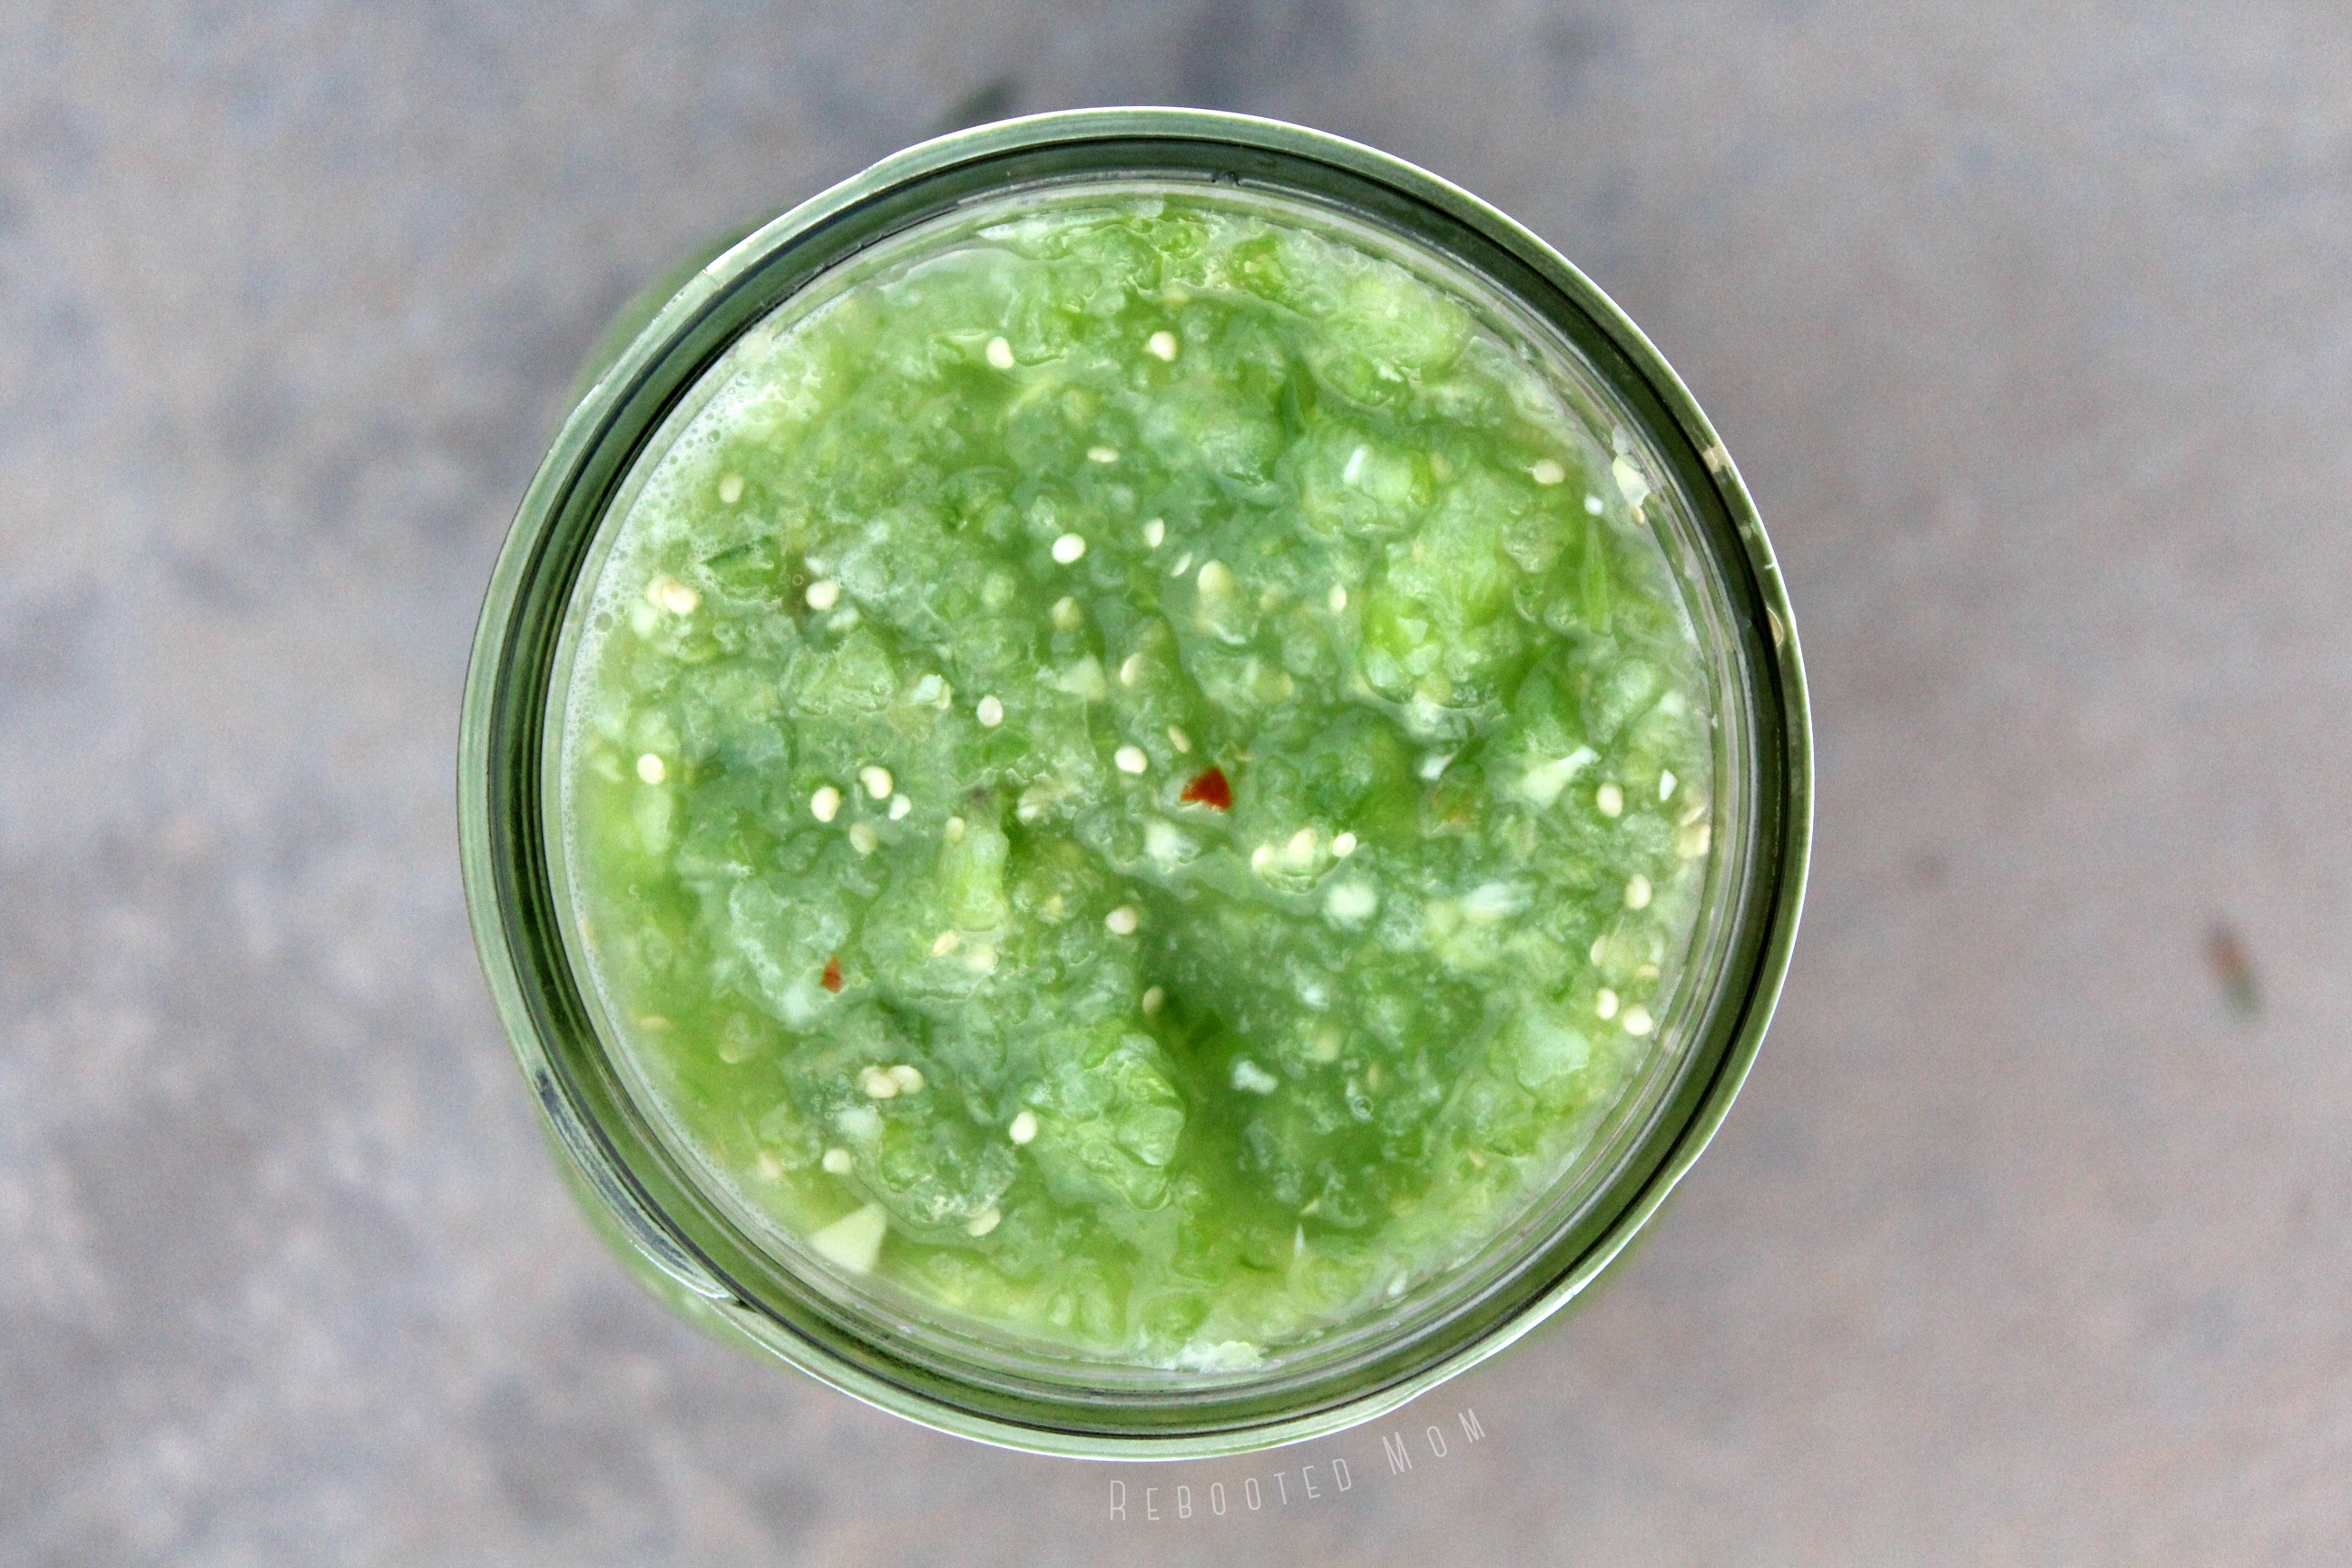 This raw and fermented tomatillo salsa is great for boosting beneficial gut bacteria. It comes together easily with just a few simple ingredients.